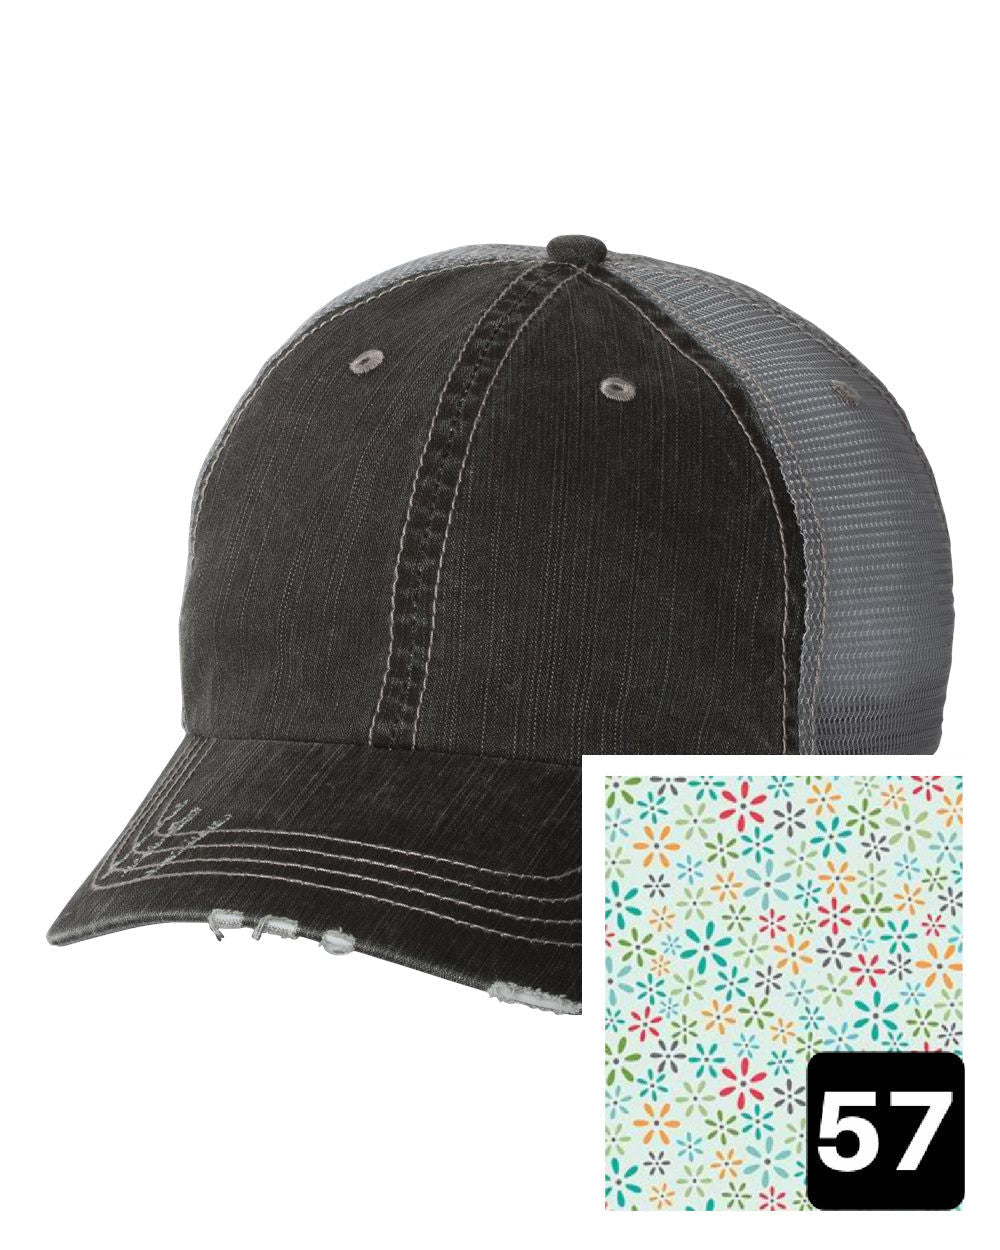 gray distressed trucker hat with white daisy on yellow fabric state of Arizona